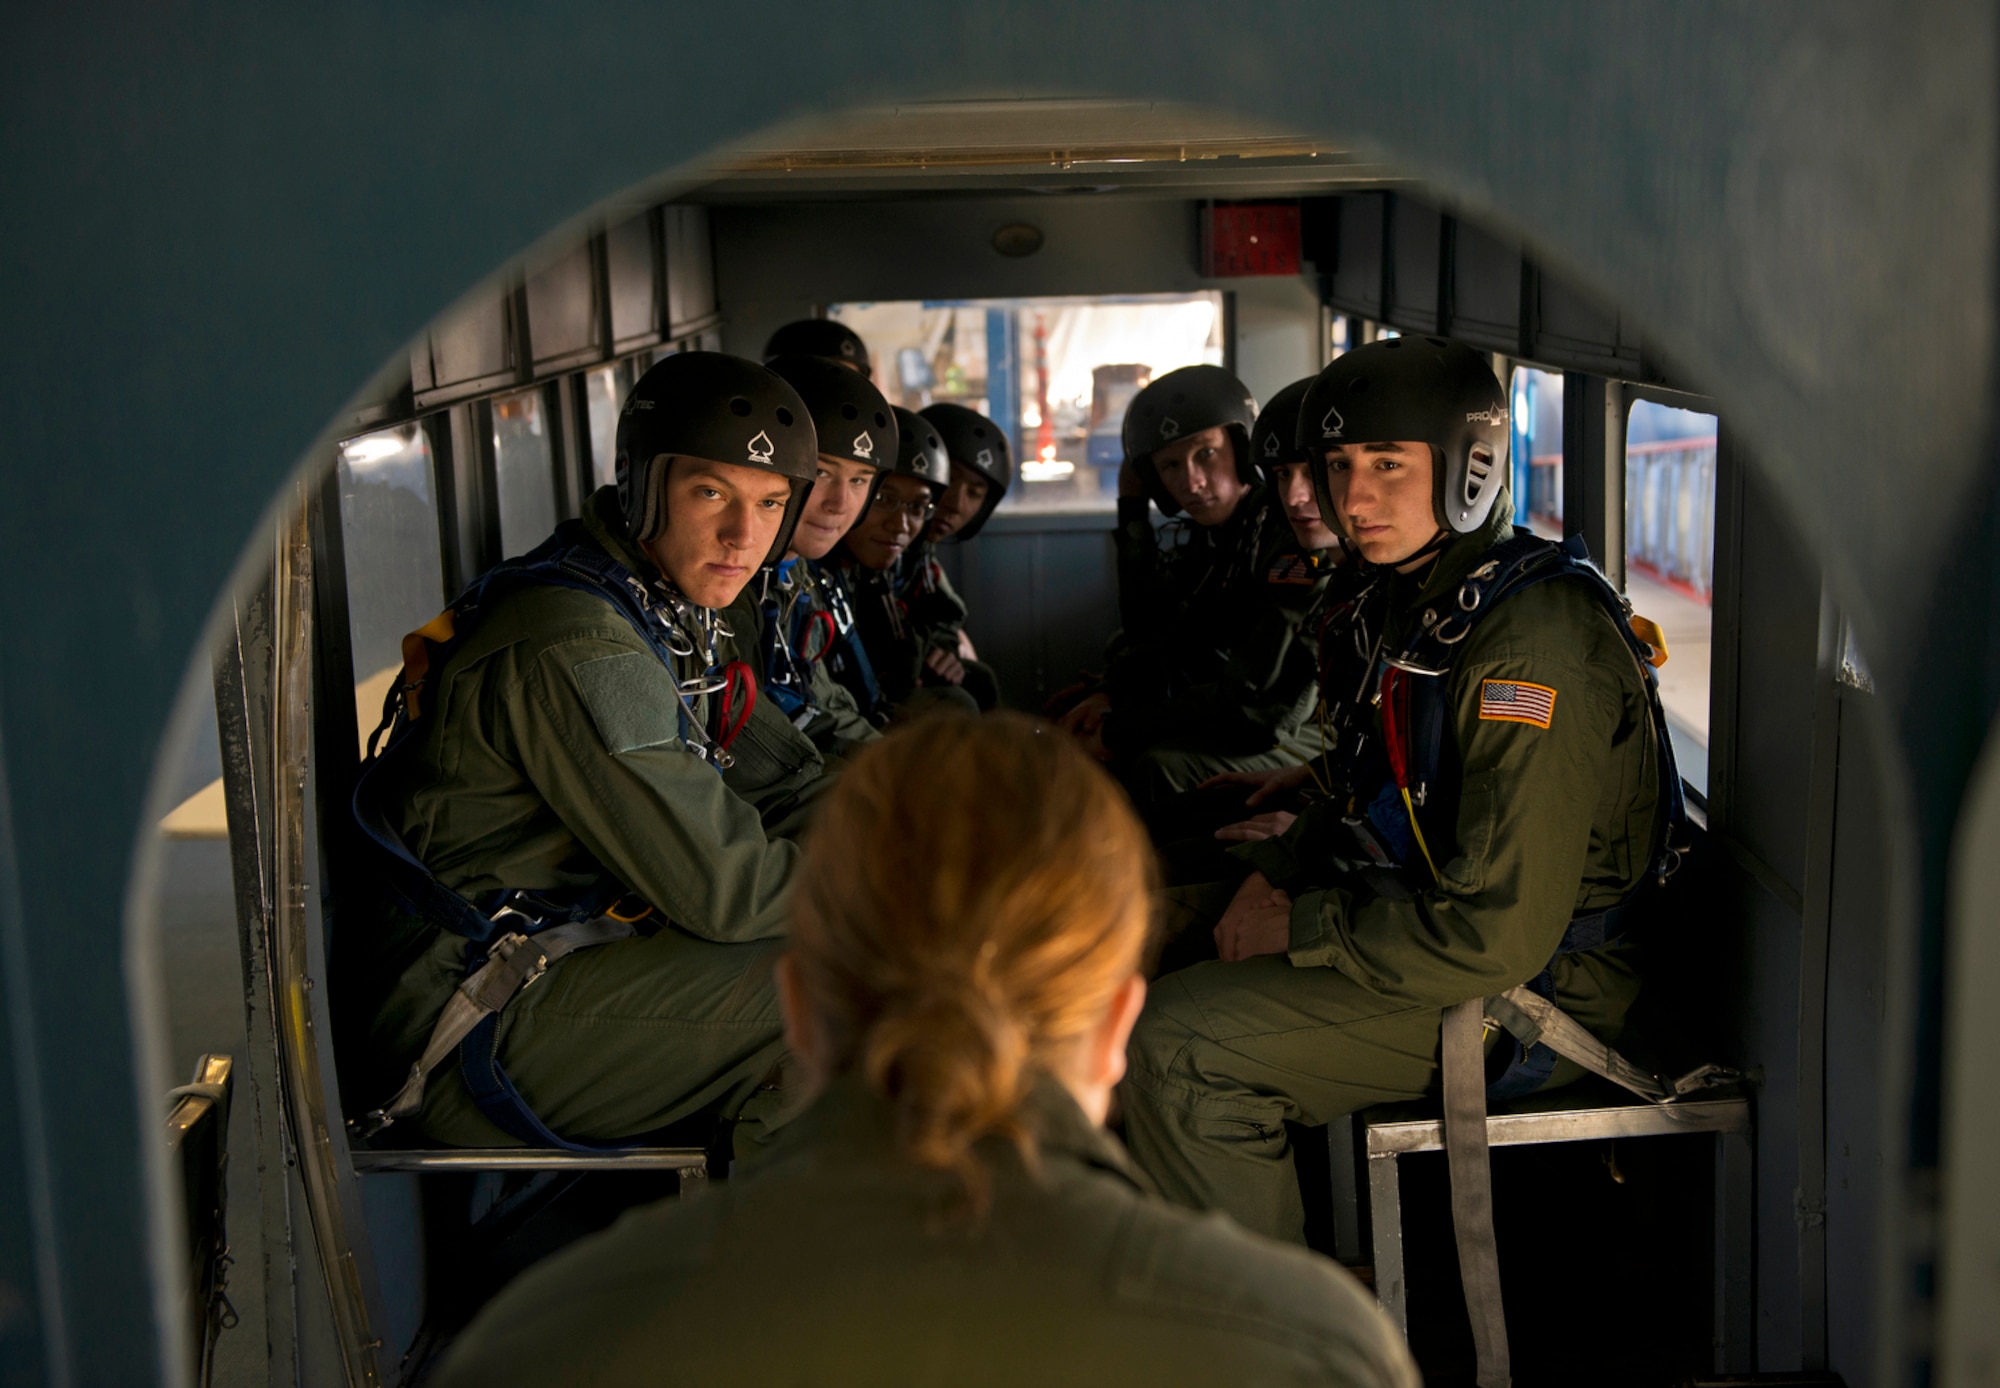 Cadets from the U.S. Air Force Academy conduct forty hours of ground training to learn the ins and outs of parachuting, everything from standing in the aircraft door, pulling their cords, emergency procedures and learning how to land properly. The course officially called AM 490, is a jump school that teaches leadership traits and is taught and organized for cadets by cadets. (U.S. Air Force photo/Tech. Sgt. Bennie J. Davis III)